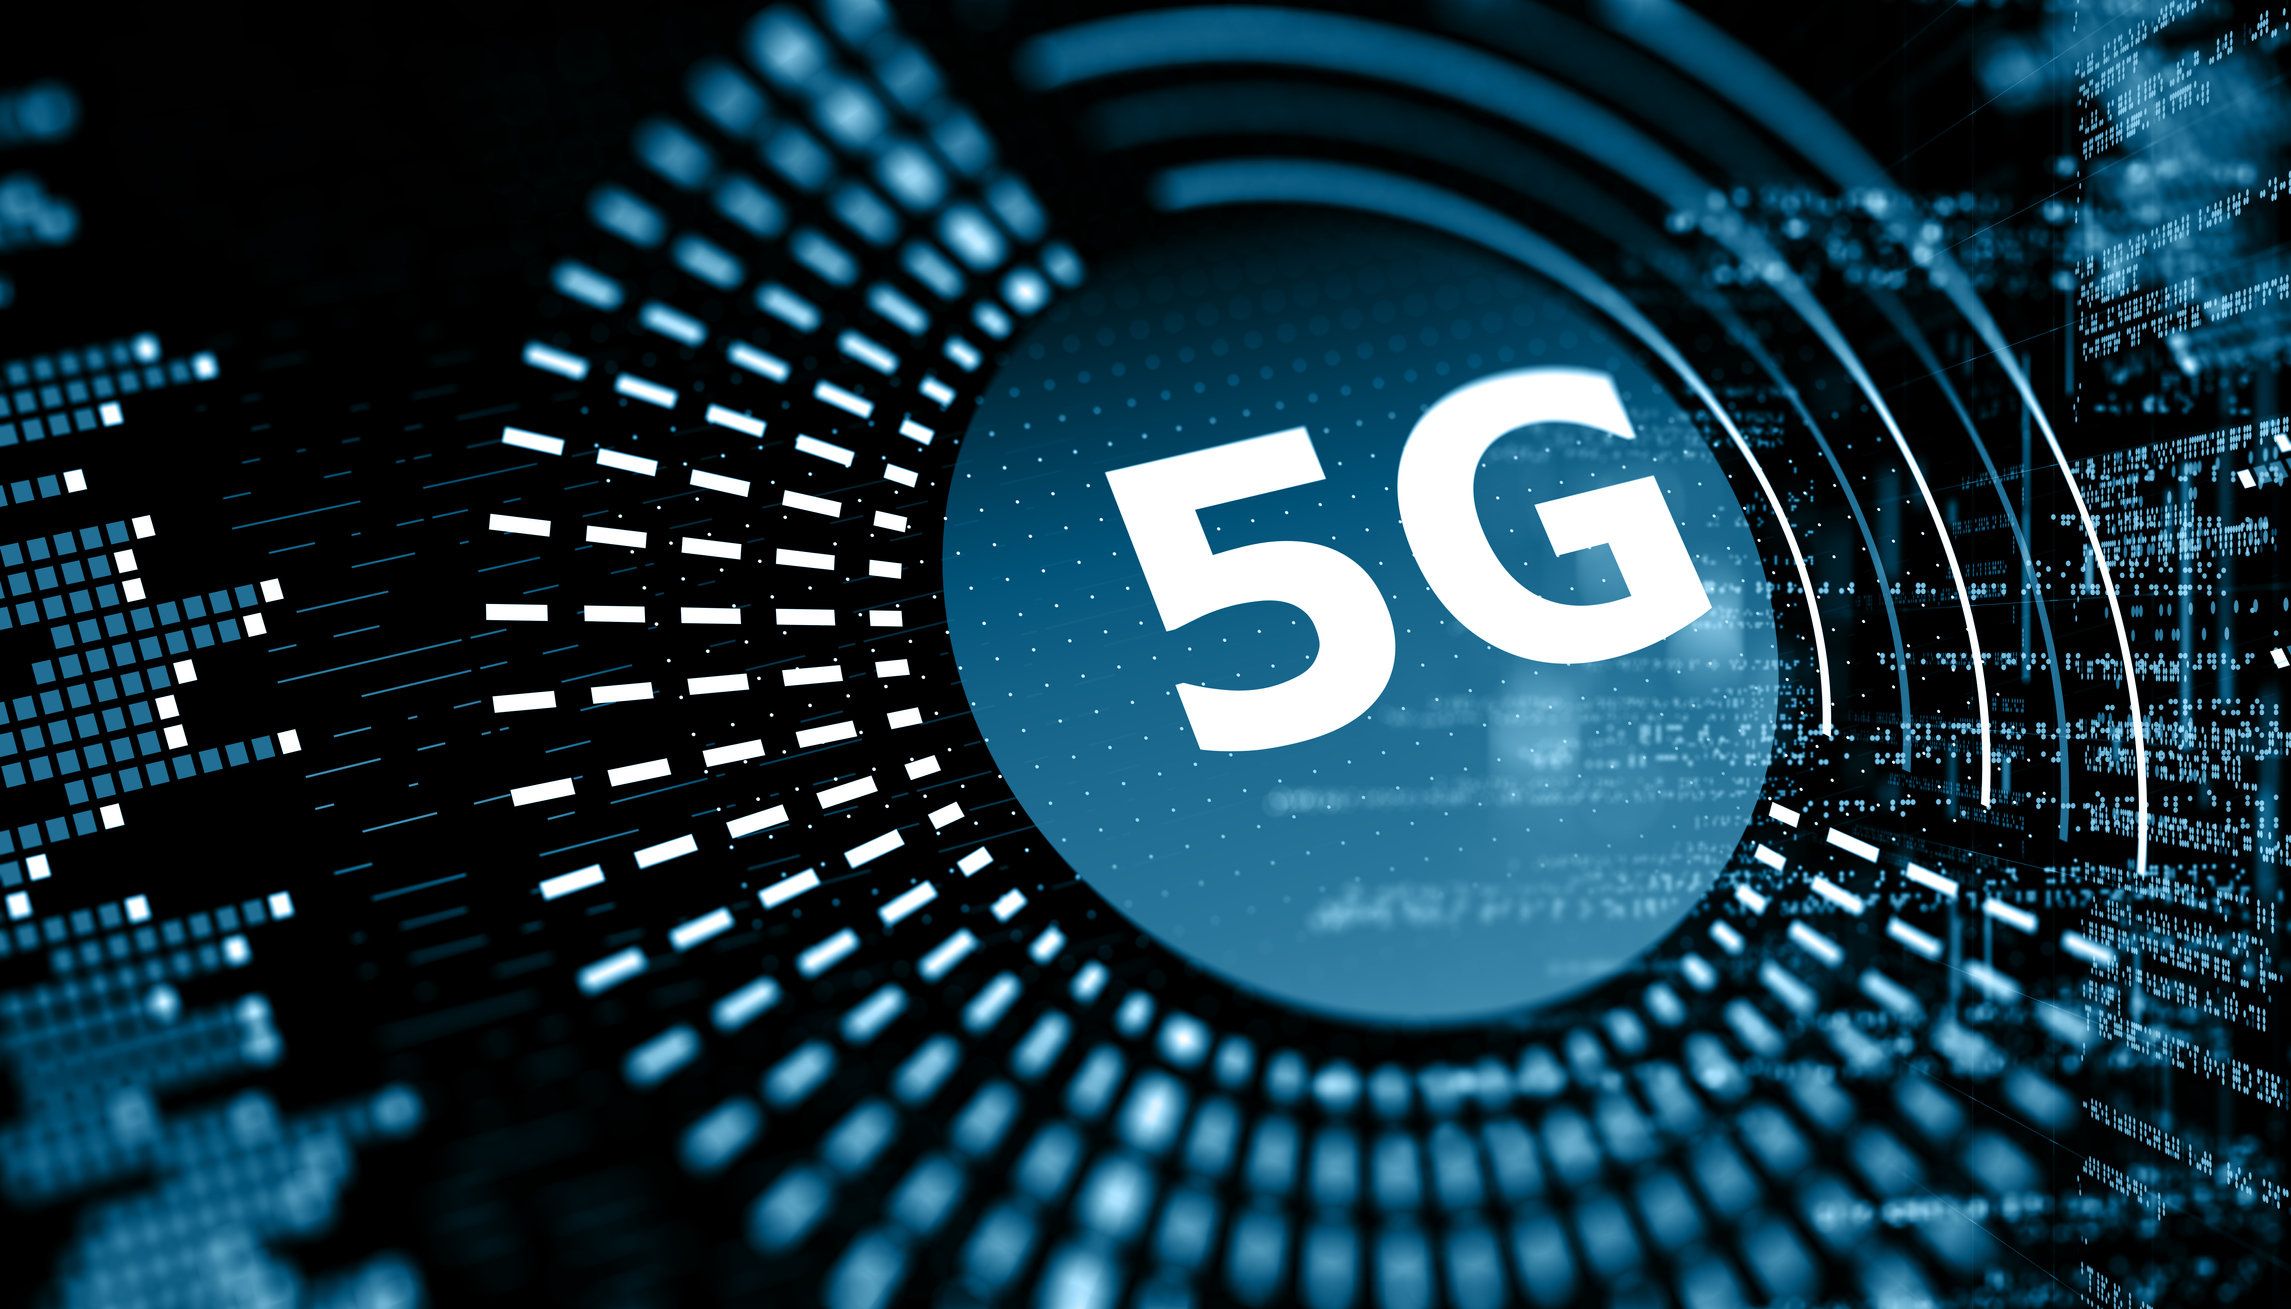 Image showing 5G technology